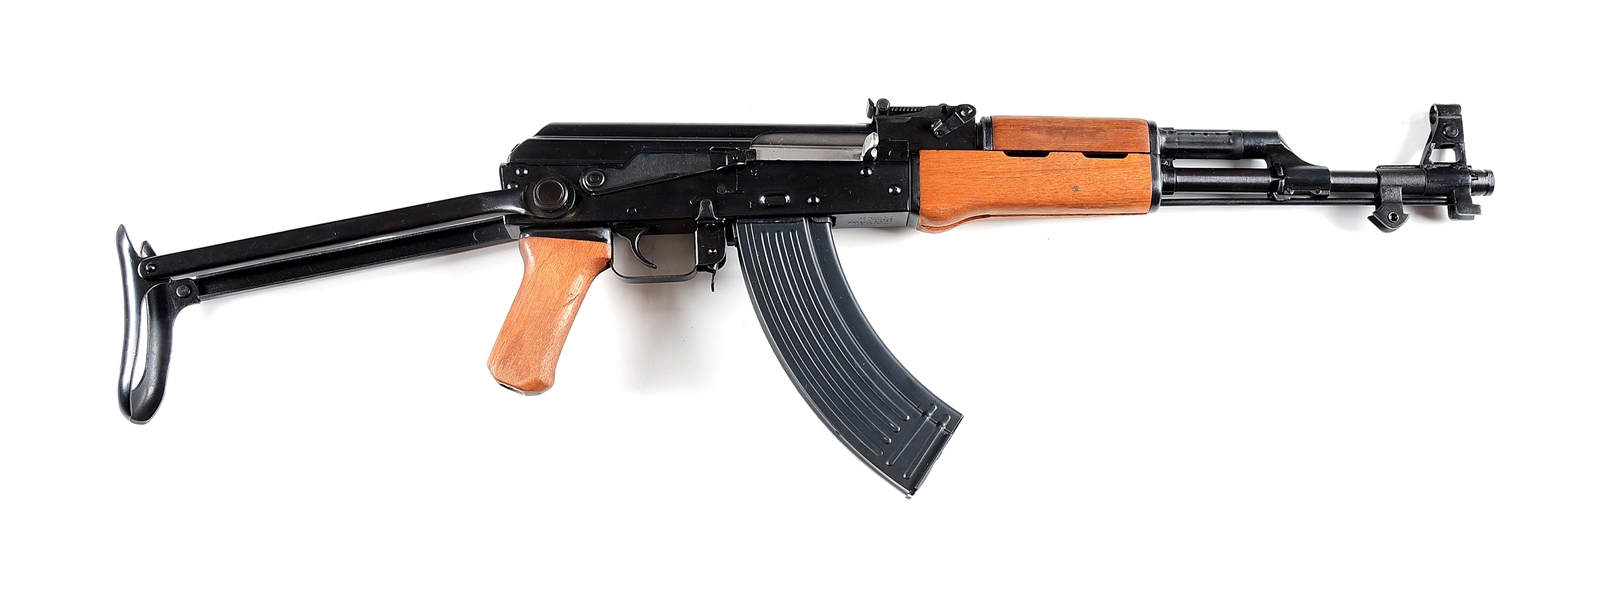 (M) EXCELLENT PRE-BAN POLYTECH MODEL AKS-762 SEMI-AUTOMATIC RIFLE WITH BOX & ACCESSORIES.